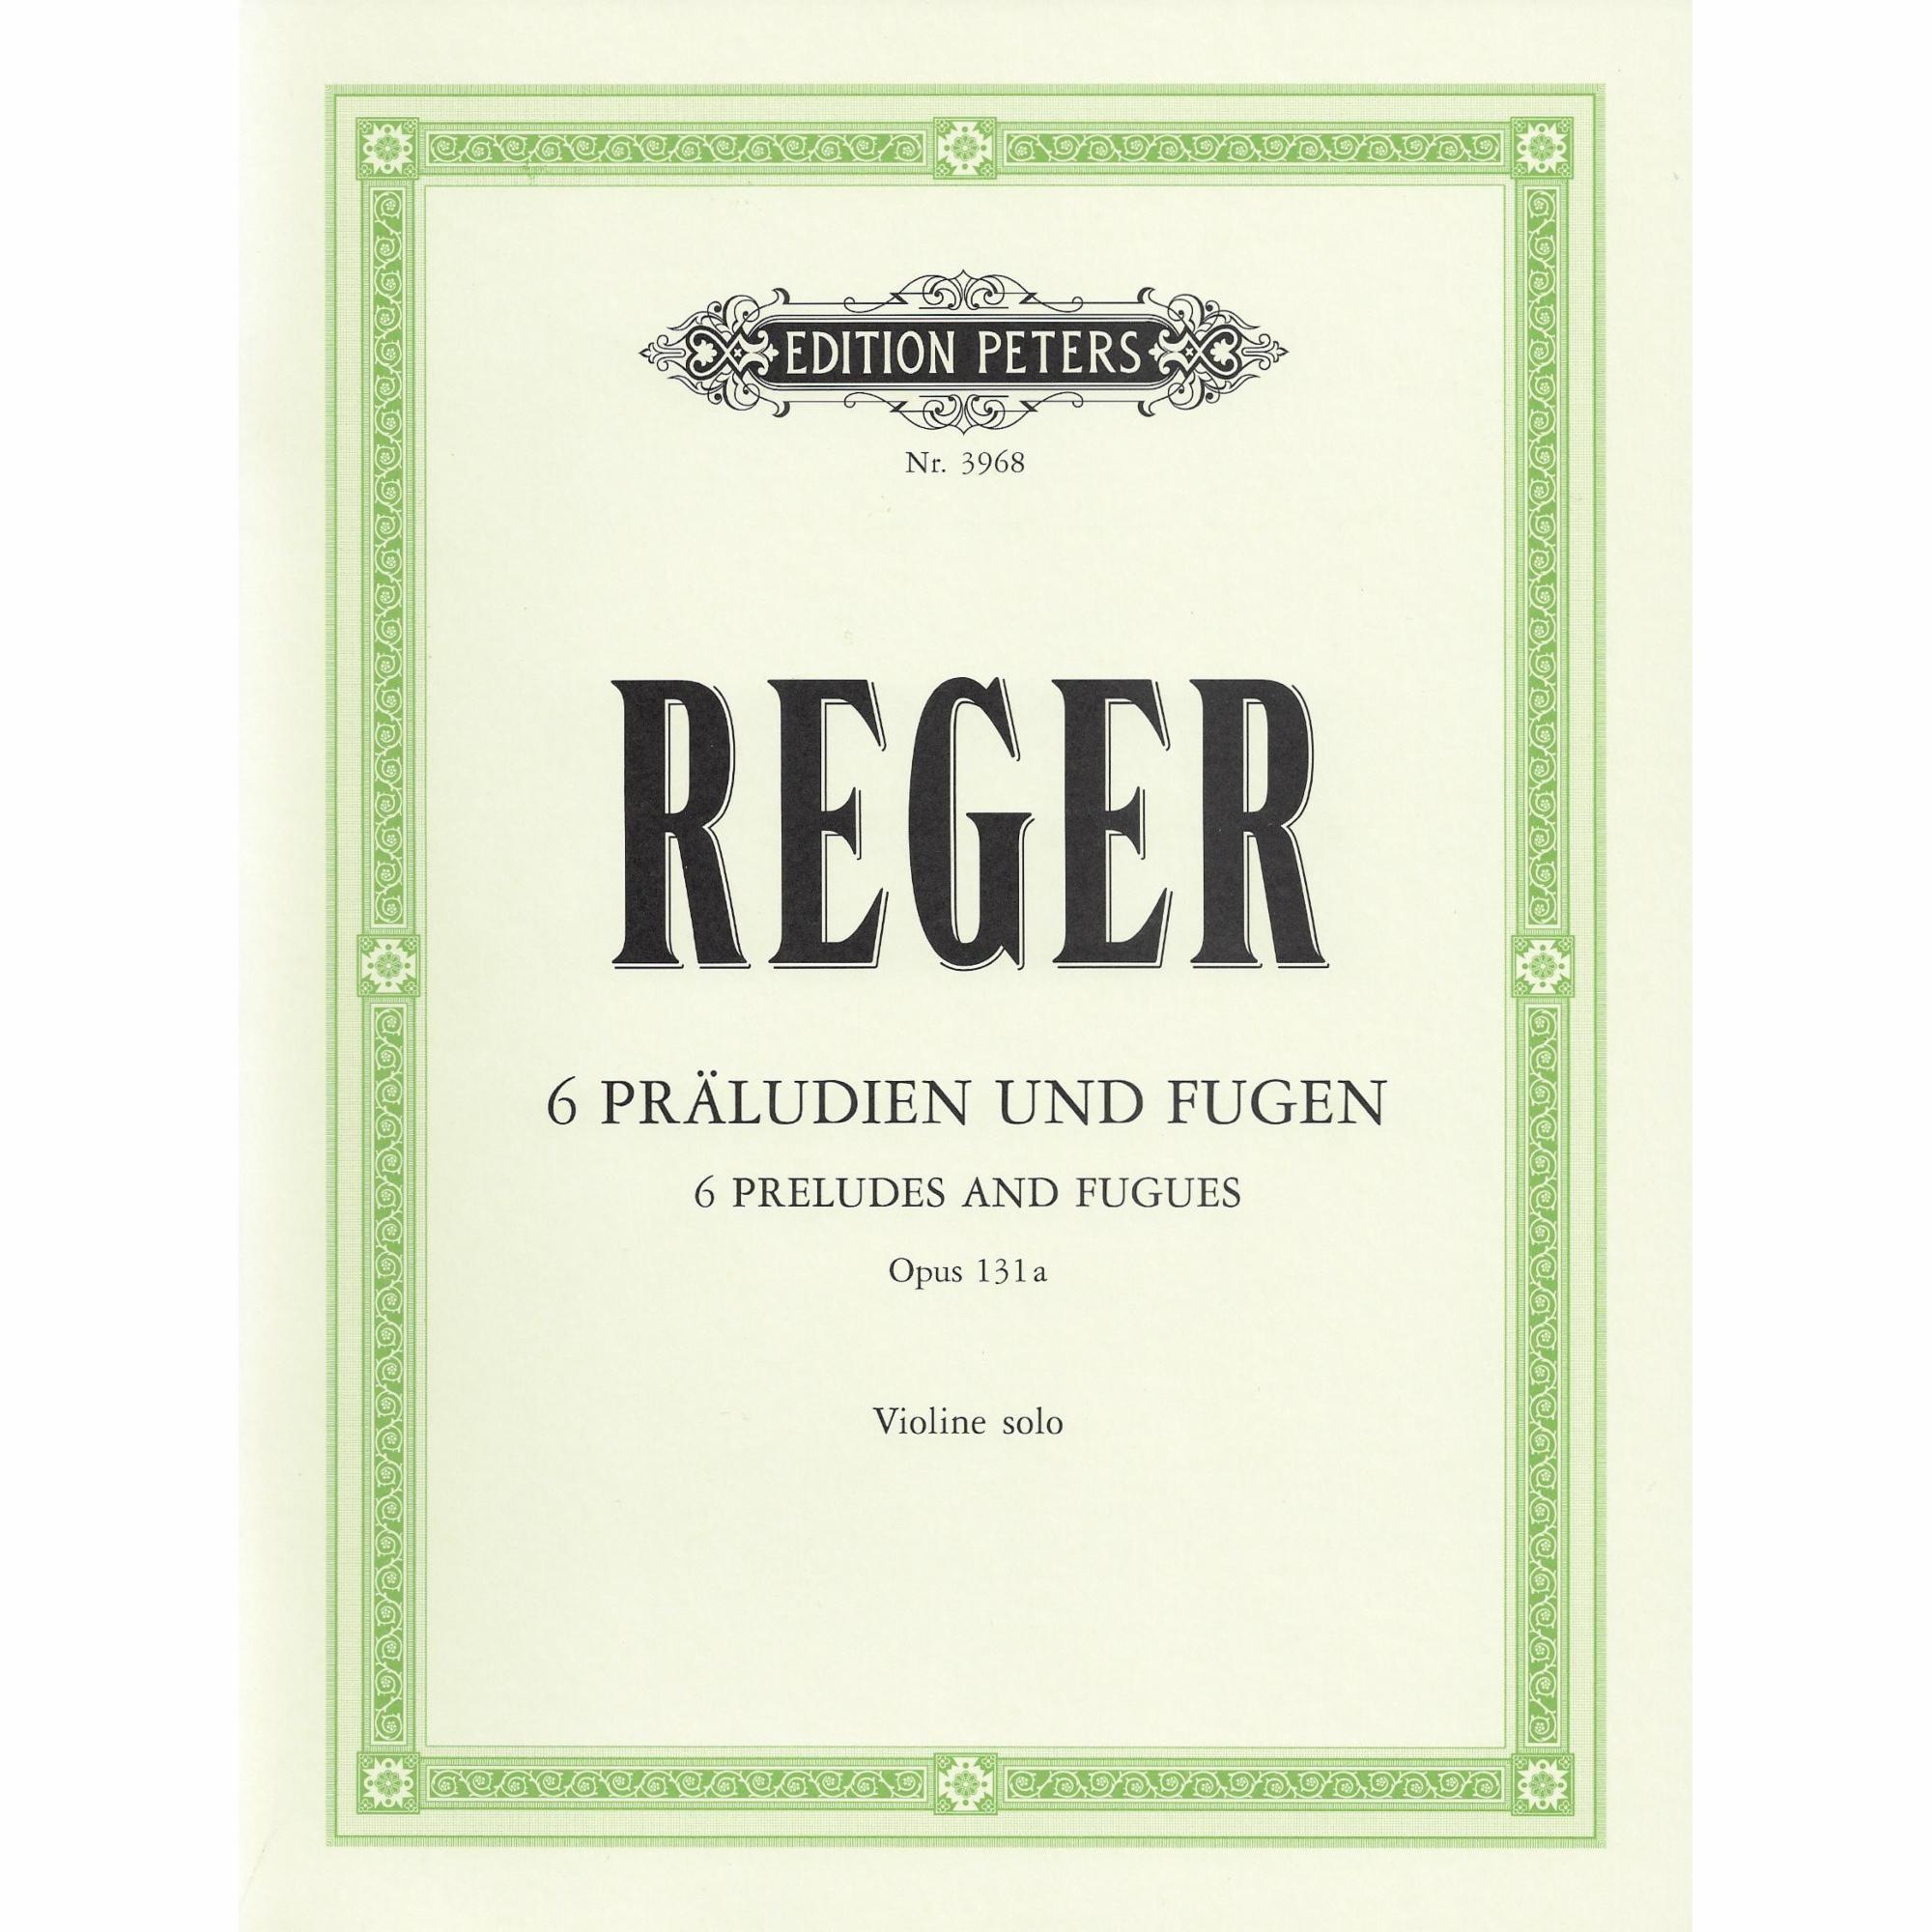 Reger -- 6 Preludes and Fugues, Op. 131a for Solo Violin